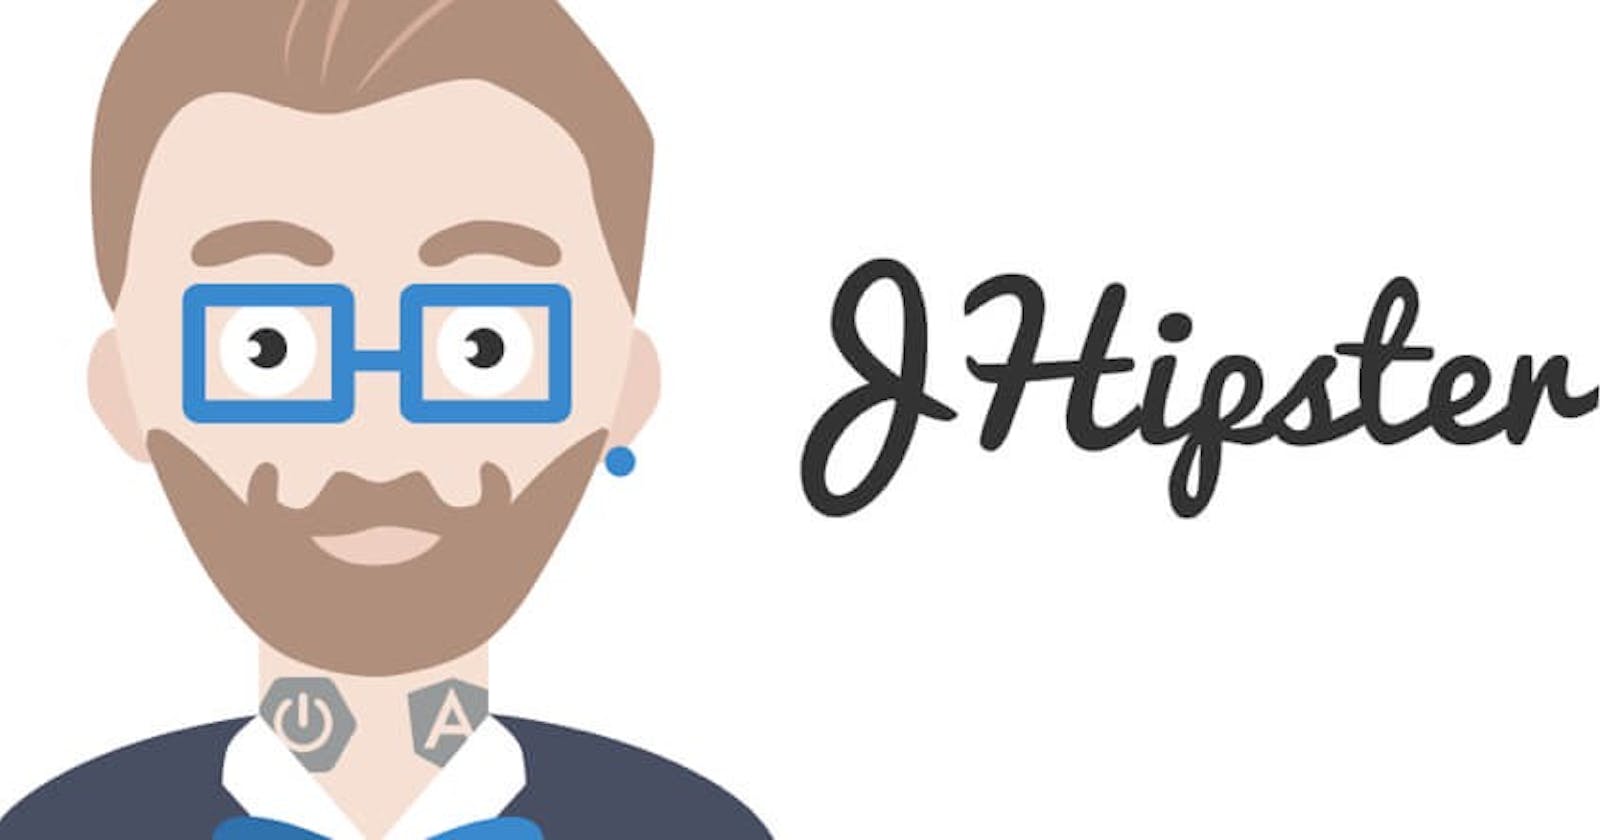 Why micro-services from scratch, JHipster is the solution for generate, develop and deploy